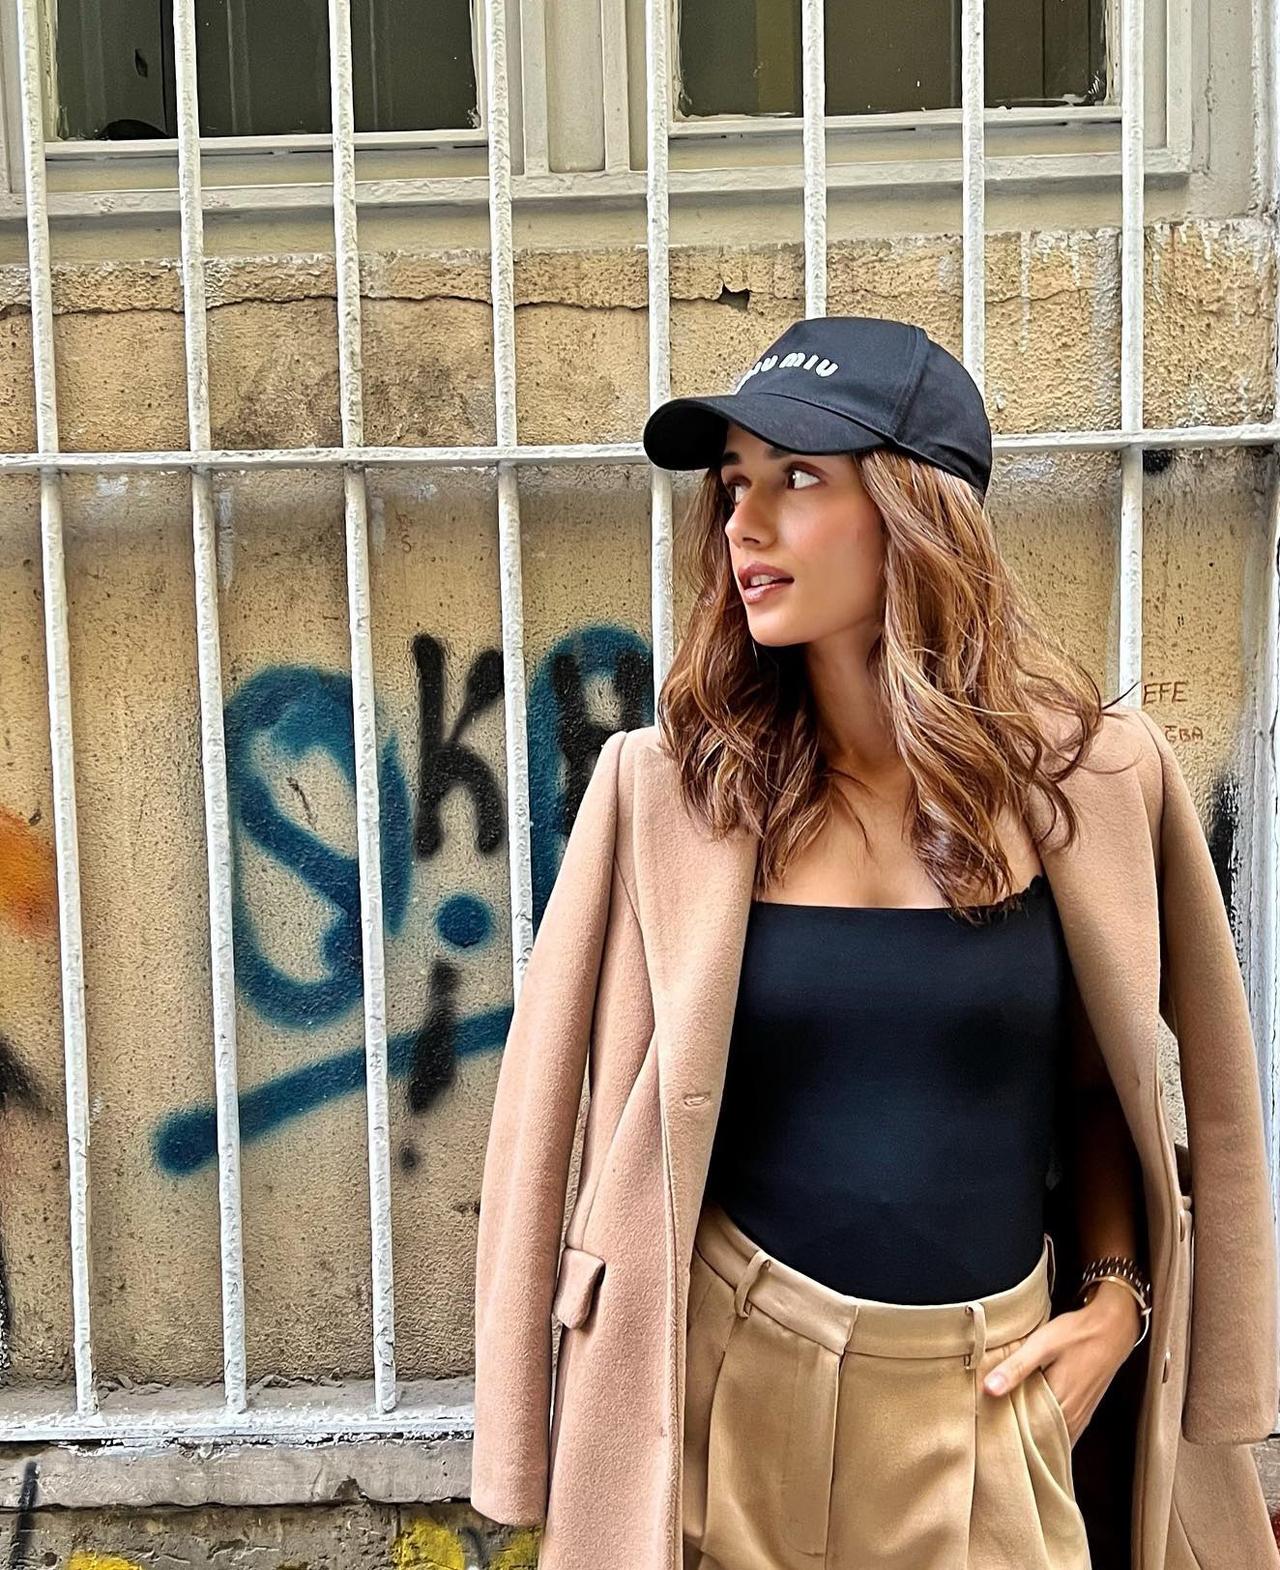 Istanbul
Manushi's casual walk in Istanbul also makes it for a very stylish one. A black top, a brown jumpsuit and a black cap is all that it takes for the actress to own the moment.